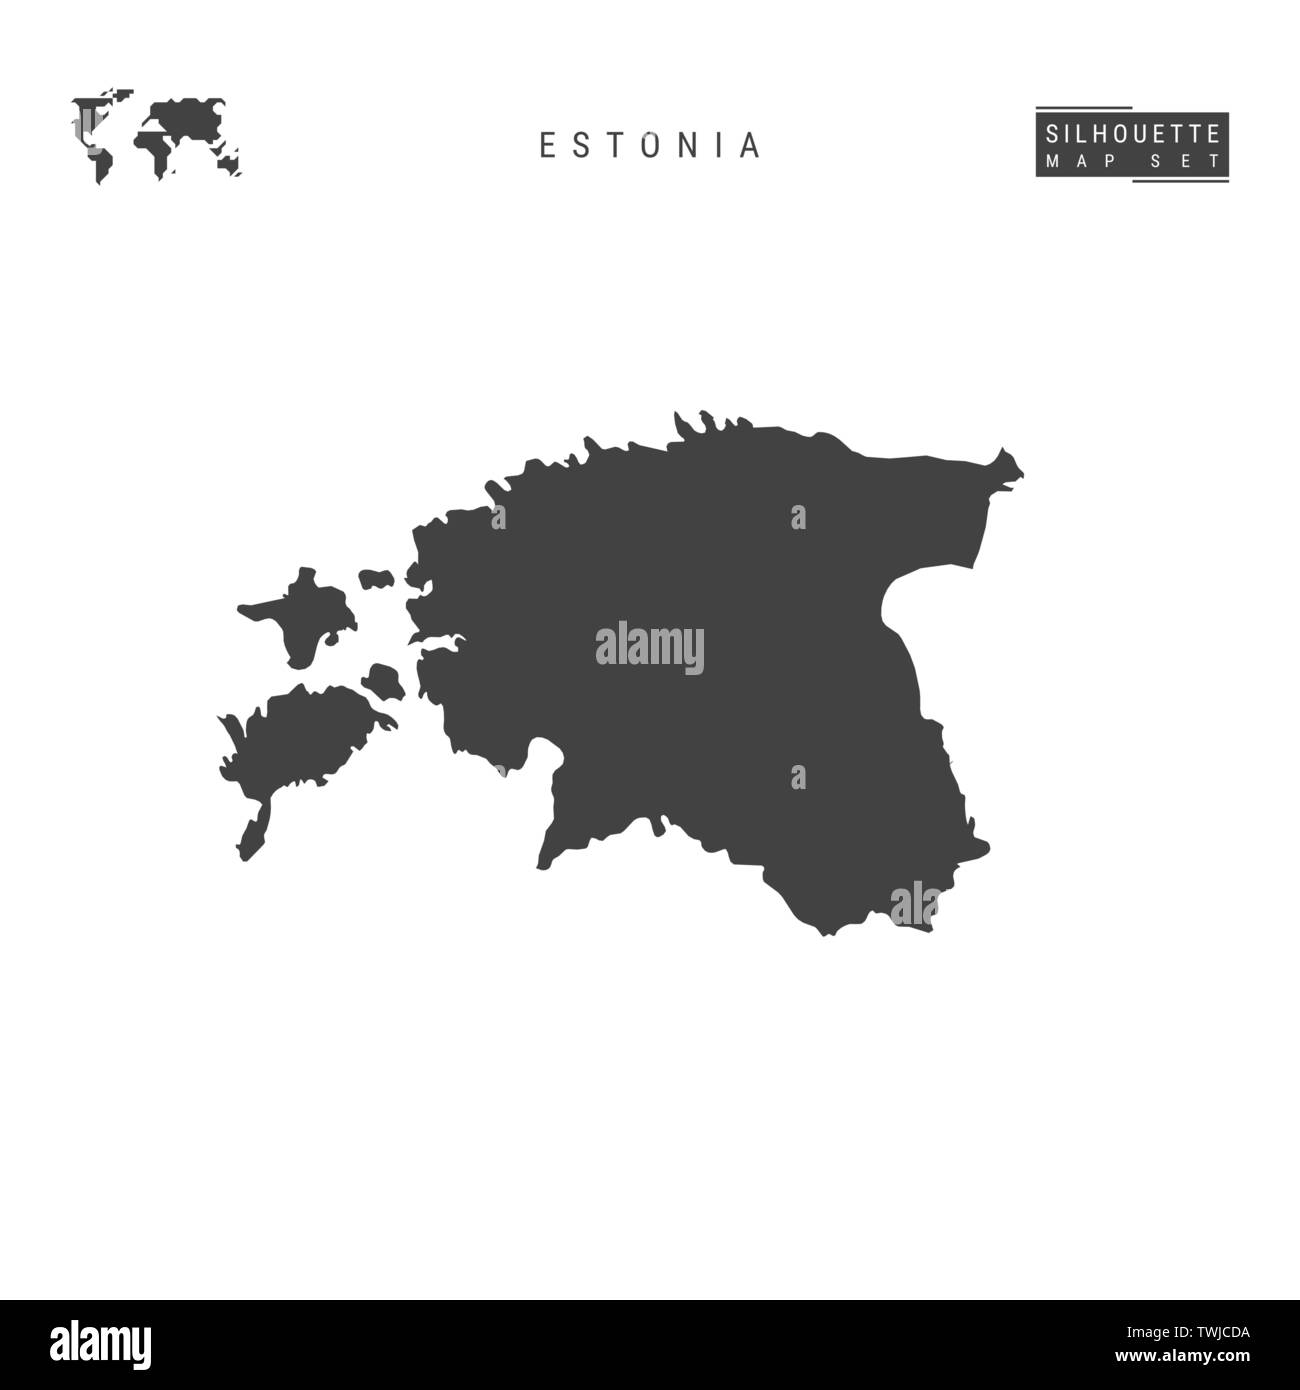 Estonia Blank Vector Map Isolated on White Background. High-Detailed Black Silhouette Map of Estonia. Stock Vector